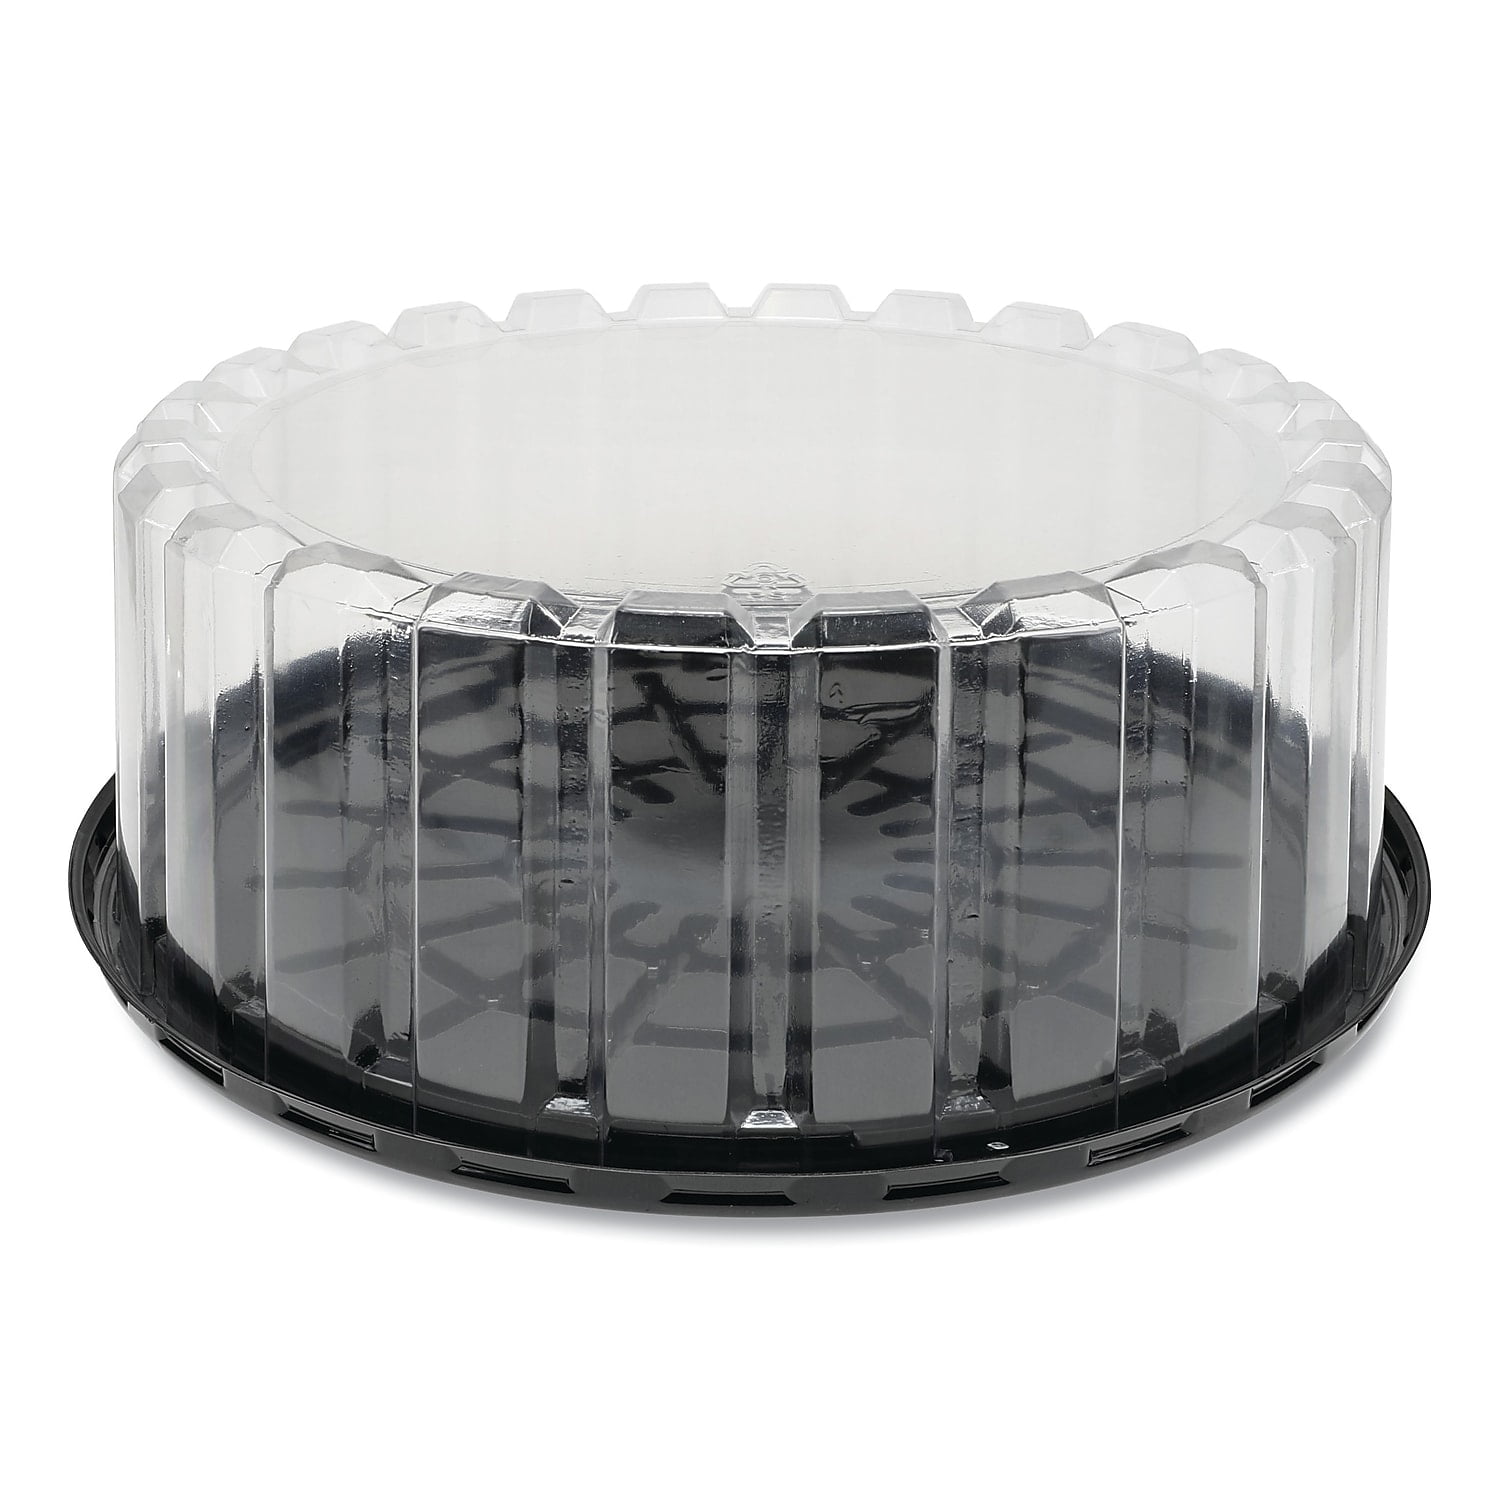 Plastic Dome Display 10in Tall Case With White Base Large for sale online